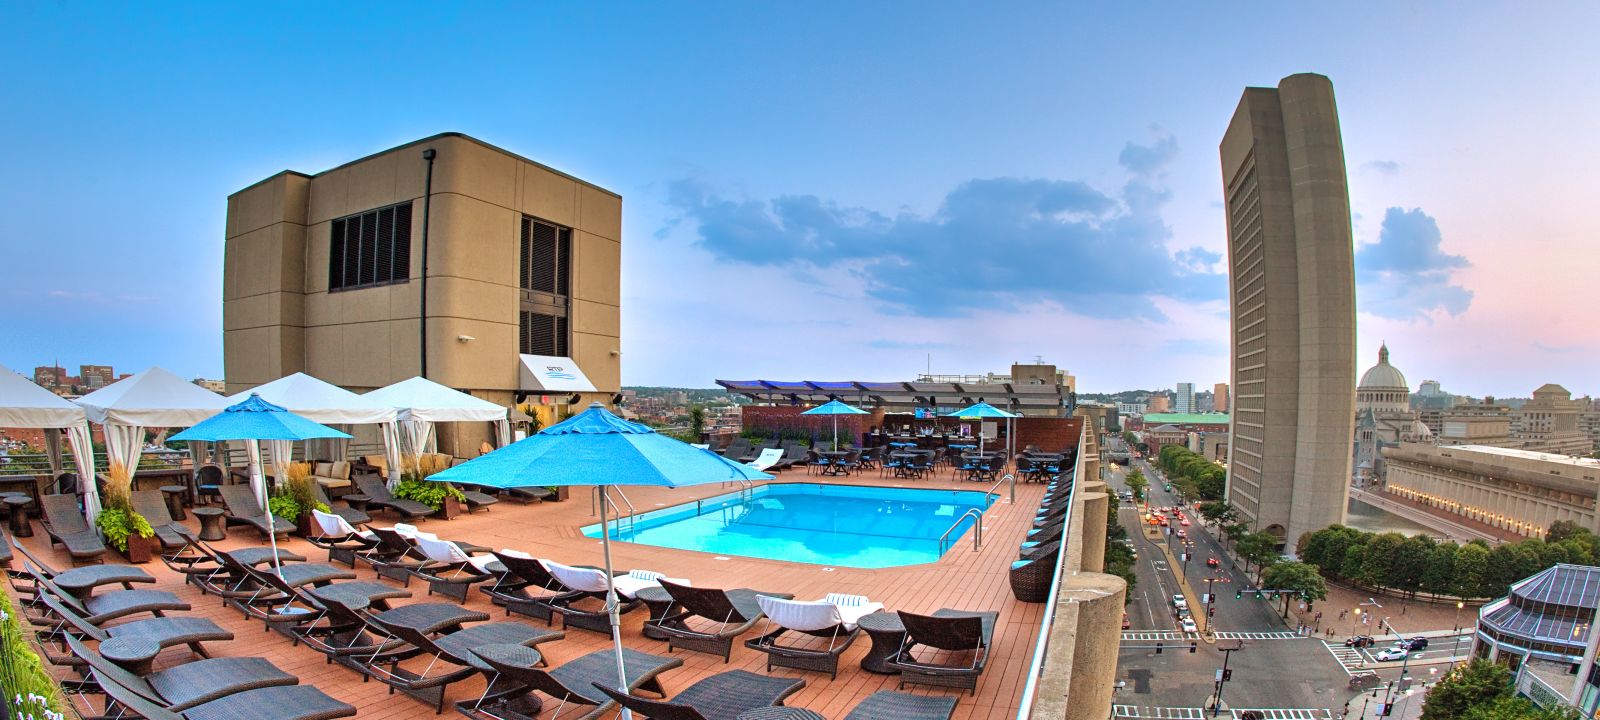 The Colonnade Hotel Rooftop Pool